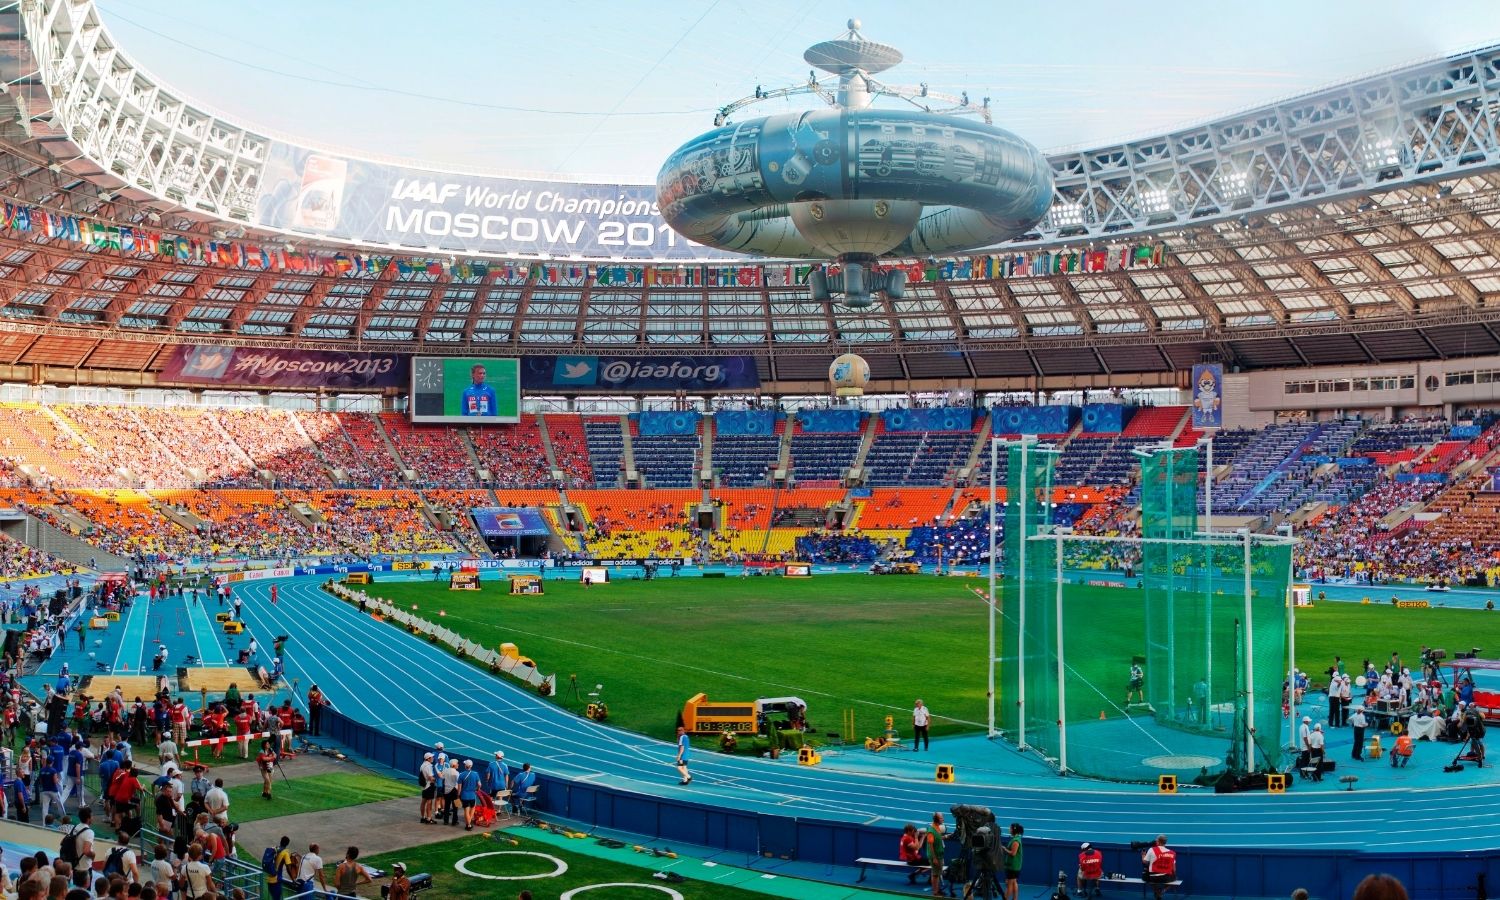 OTD in 2013: The 14th IAAF World Championships opened in Moscow